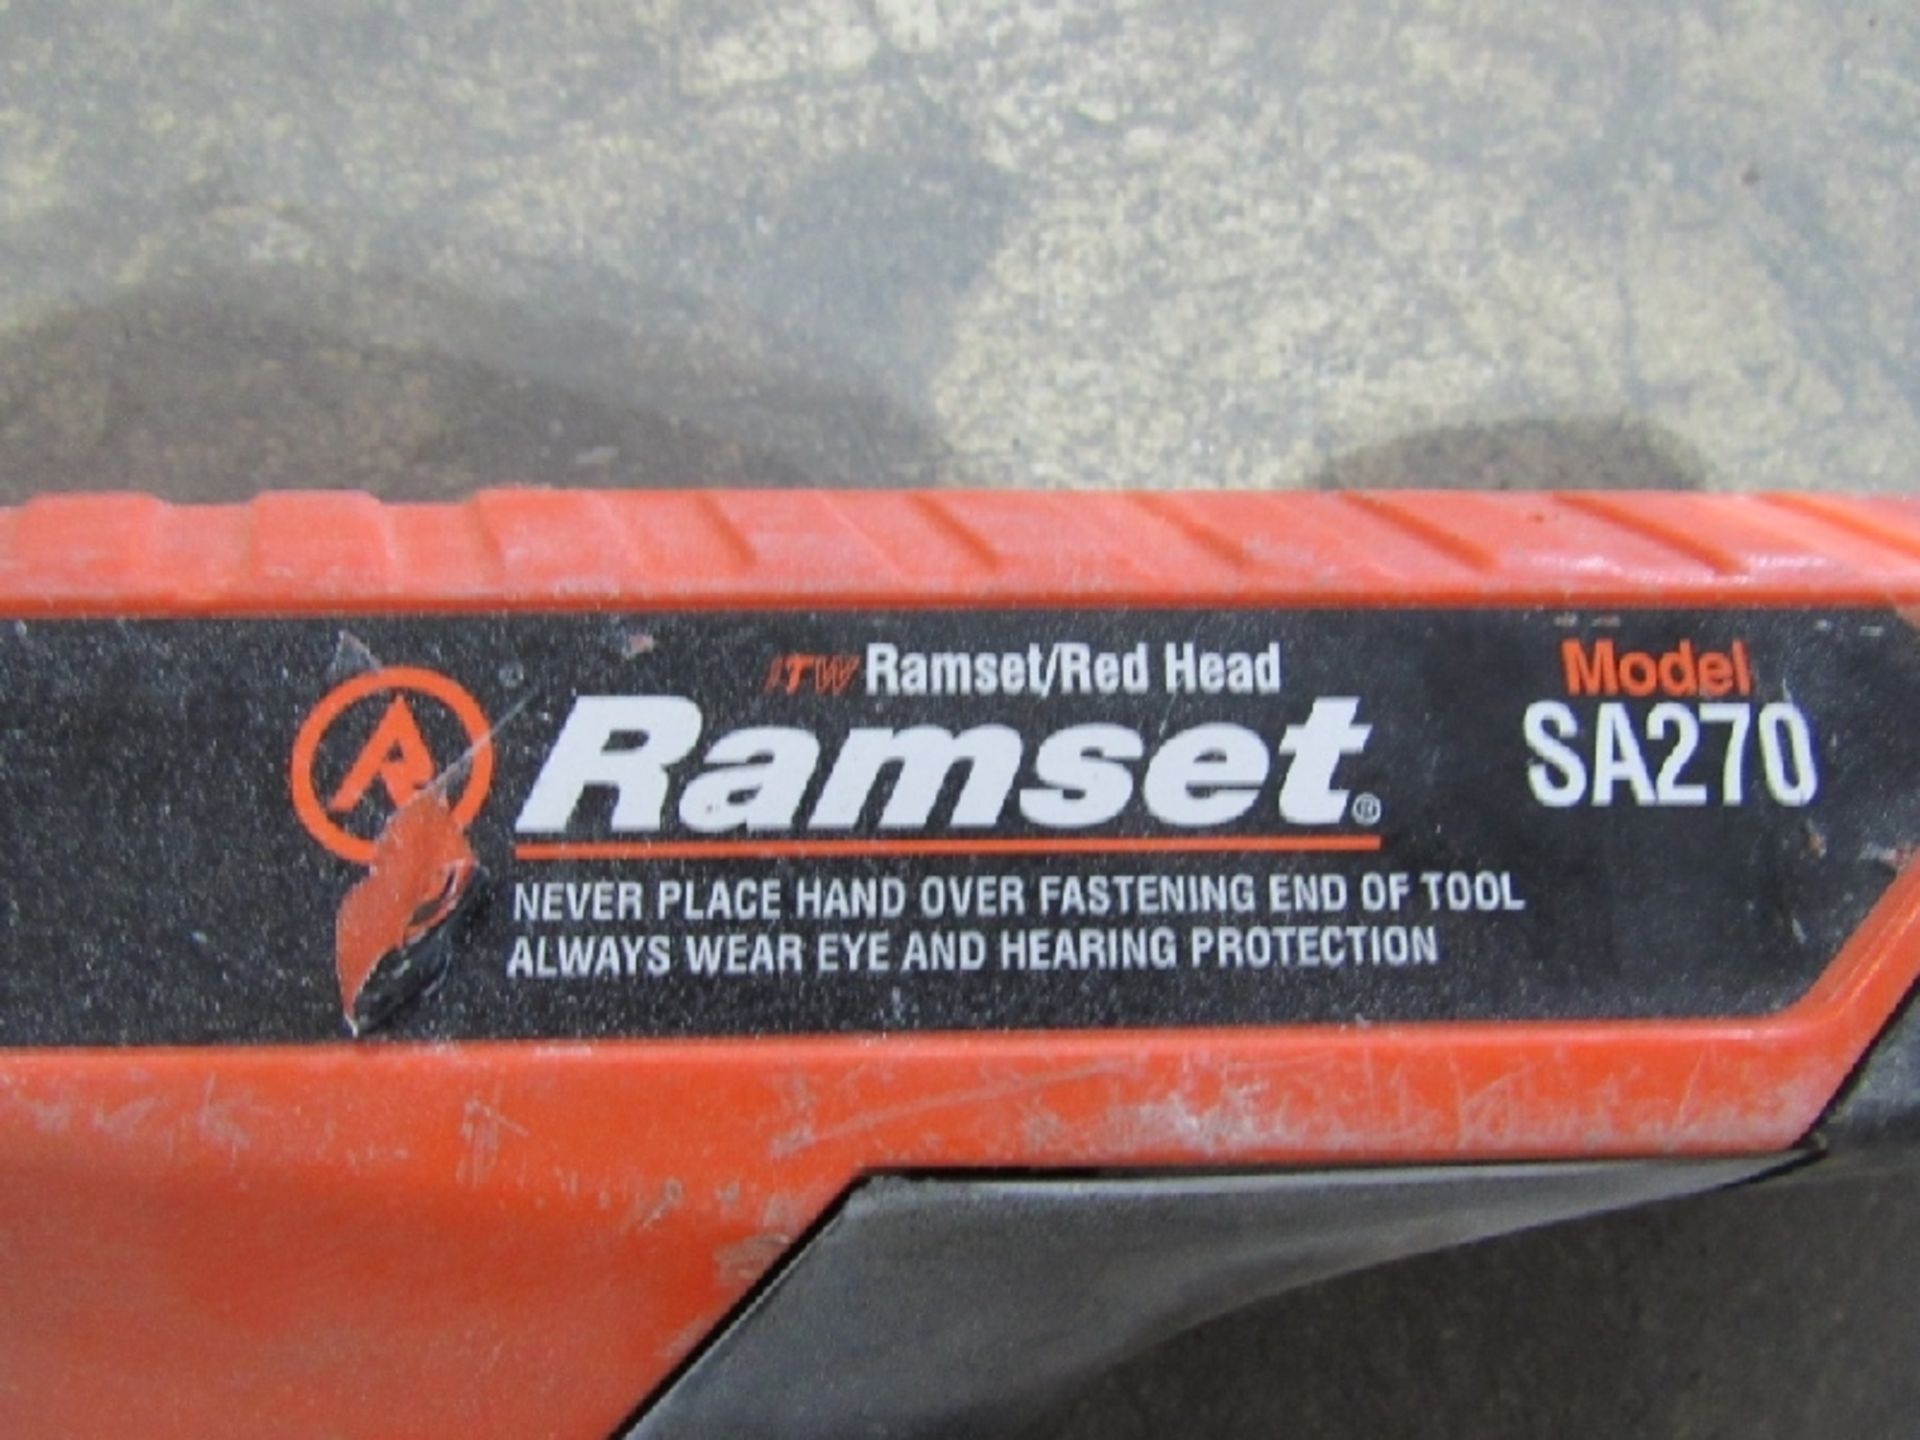 Ramset Fastening Tool- ***Located in Chattanooga, TN*** MFR - Ramset Model - SA270 - Image 4 of 6